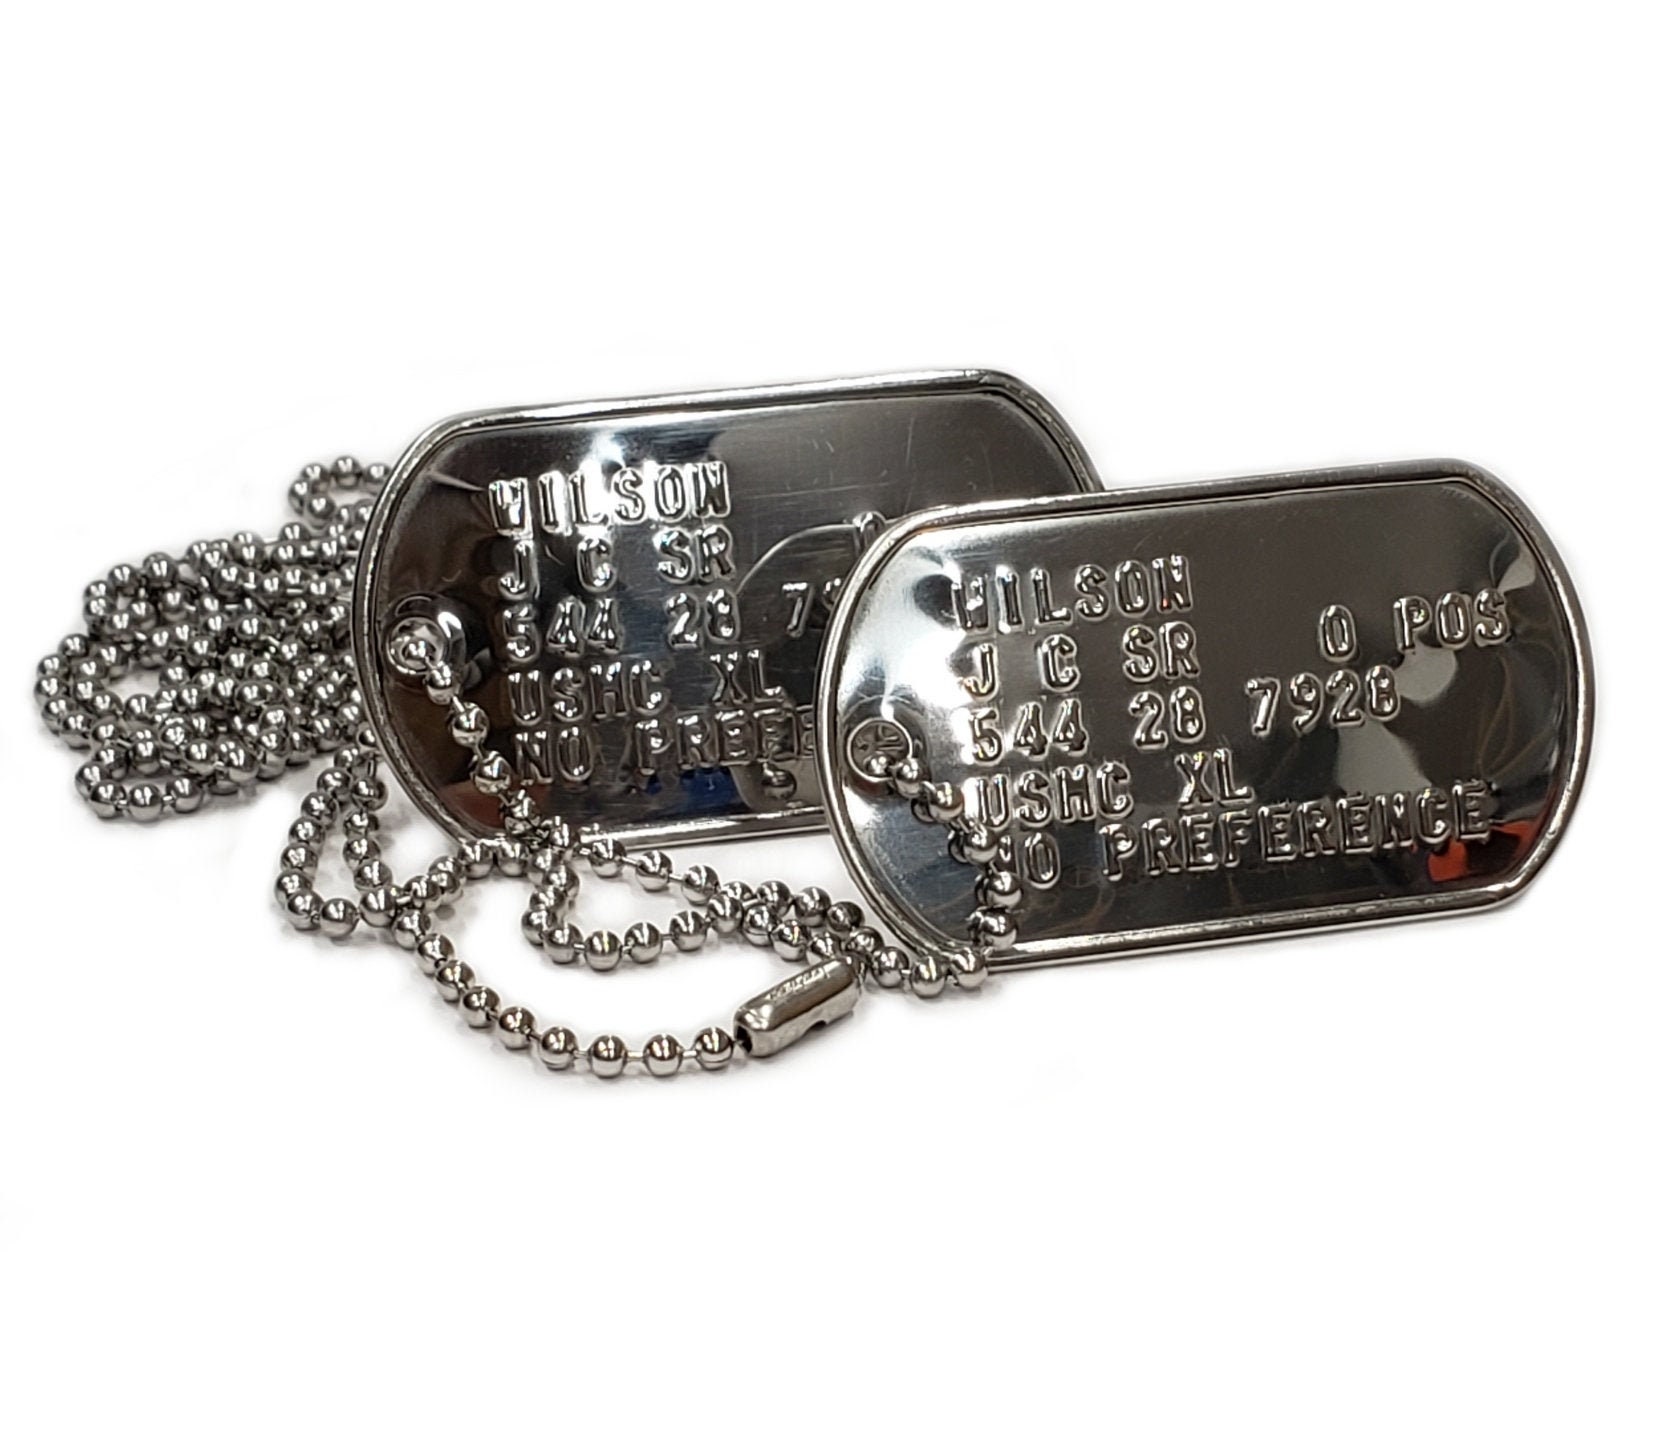 2 Personalized Dog Tags Necklace, Two Army ID Tag With Text, Coordinates  Necklace for Men, Solid Sterling Silver With Ball Chain H107 